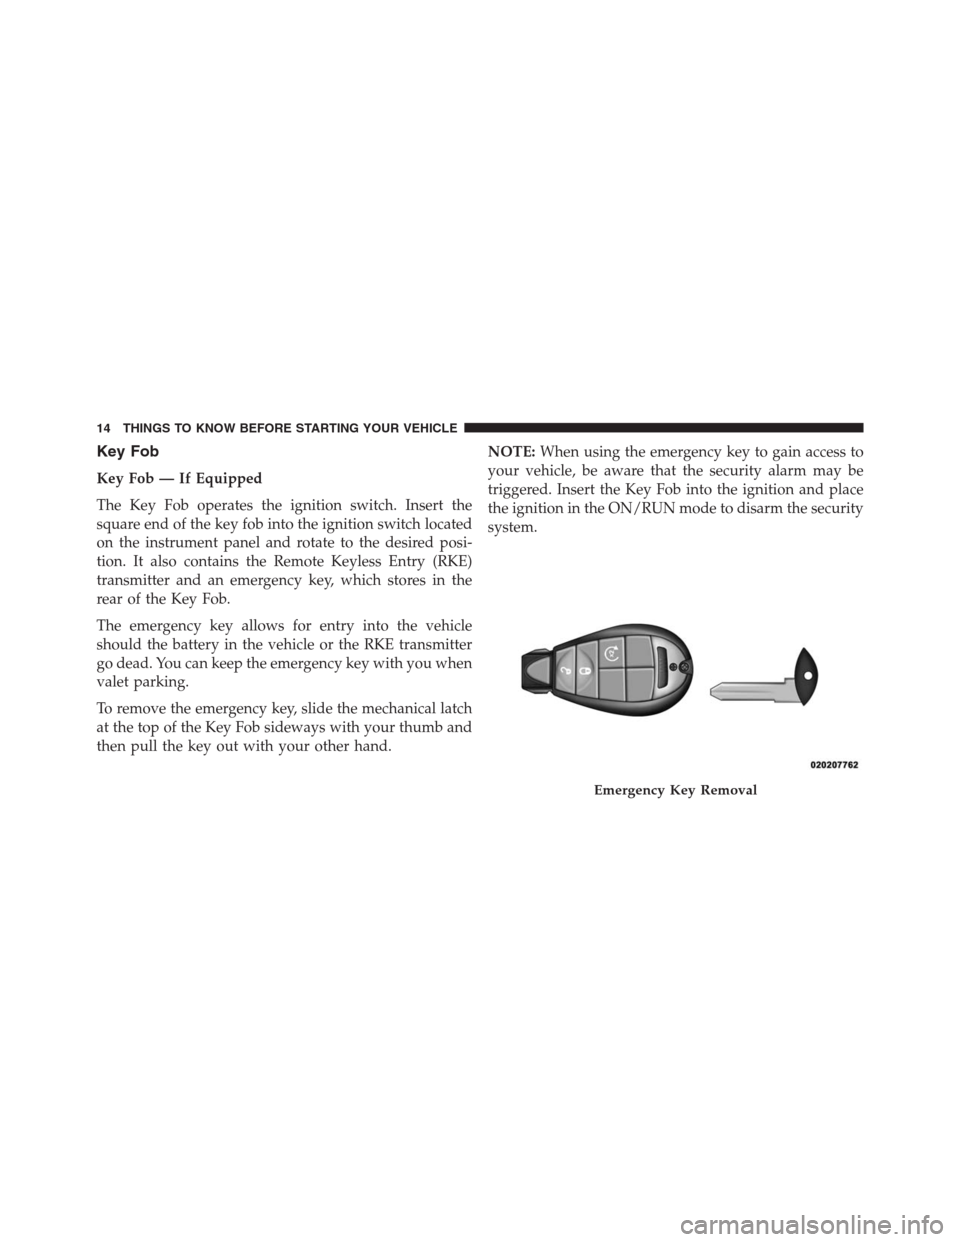 Ram 1500 2016 User Guide Key Fob
Key Fob — If Equipped
The Key Fob operates the ignition switch. Insert the
square end of the key fob into the ignition switch located
on the instrument panel and rotate to the desired posi-
